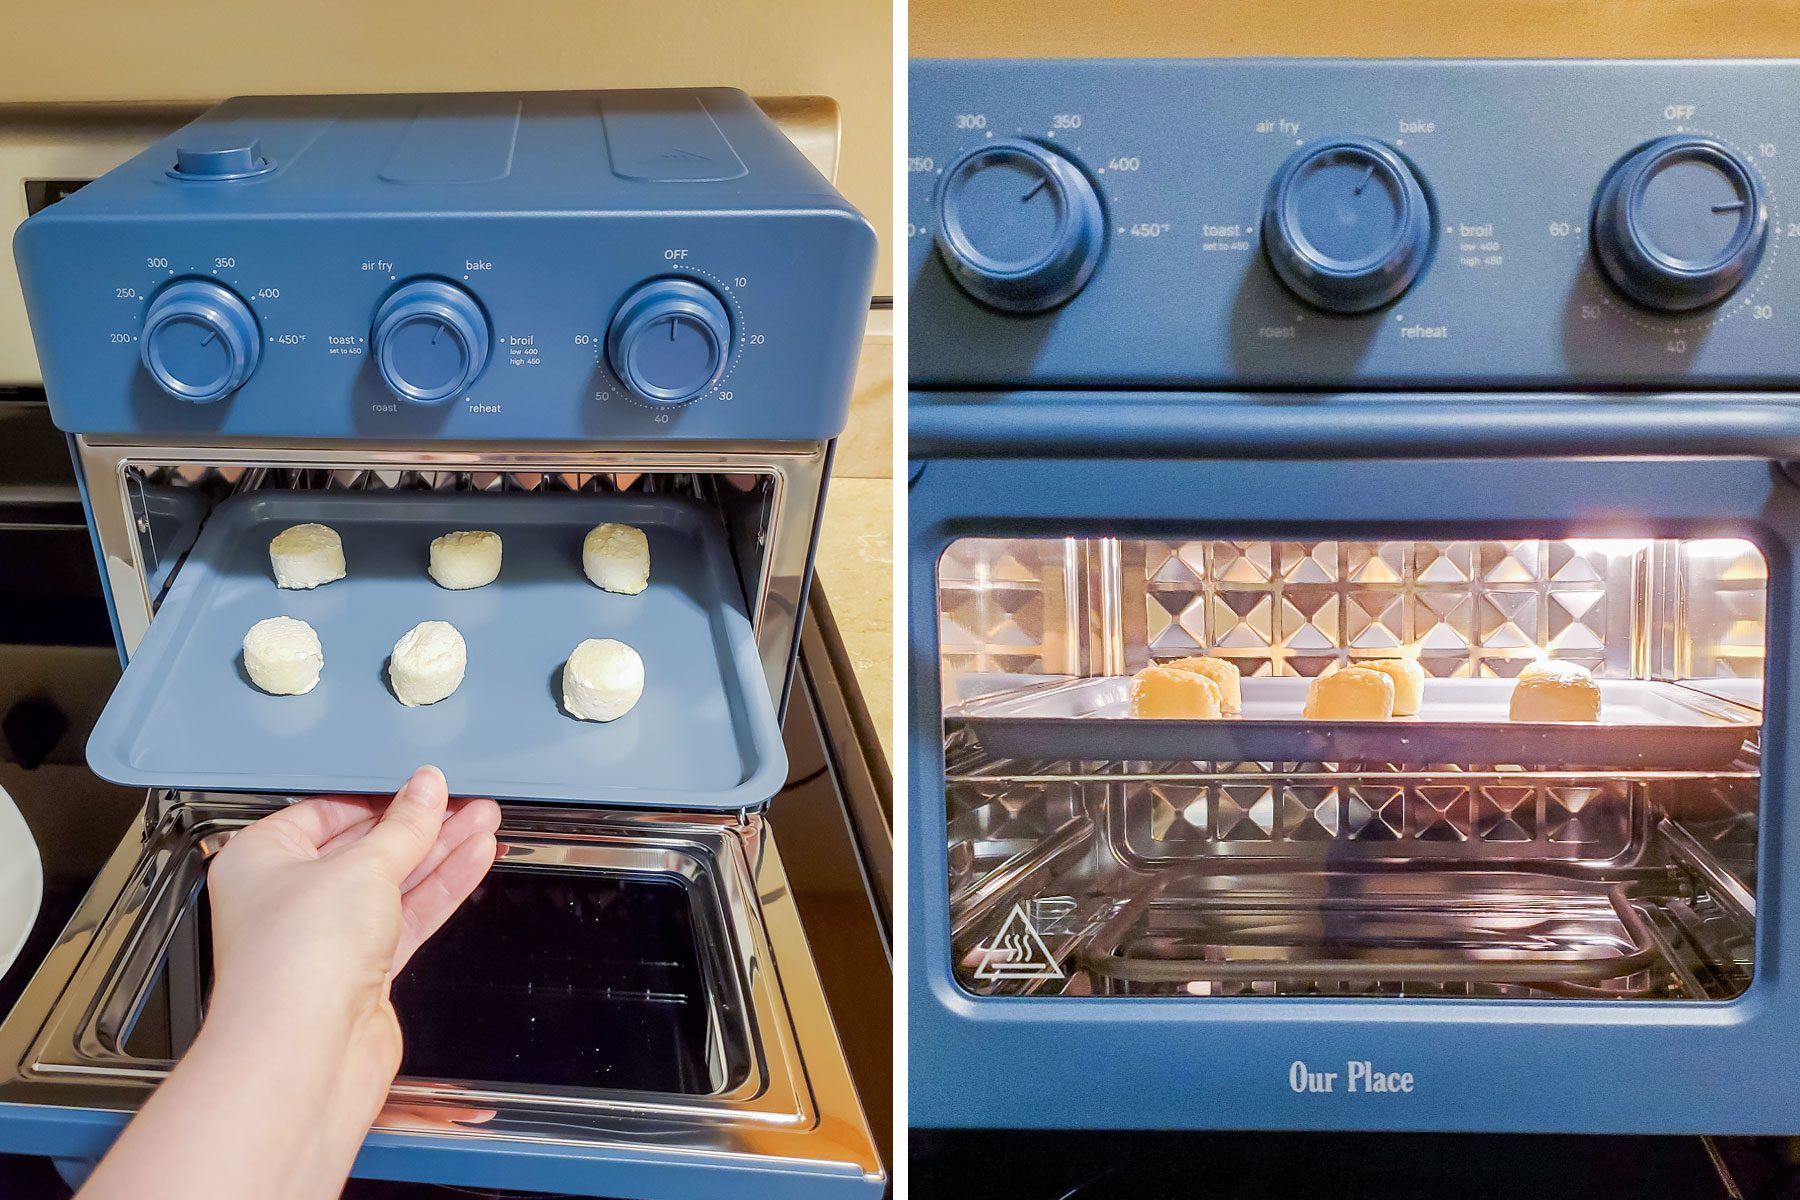 Our Place Releases the Wonder Oven: Our First Impressions